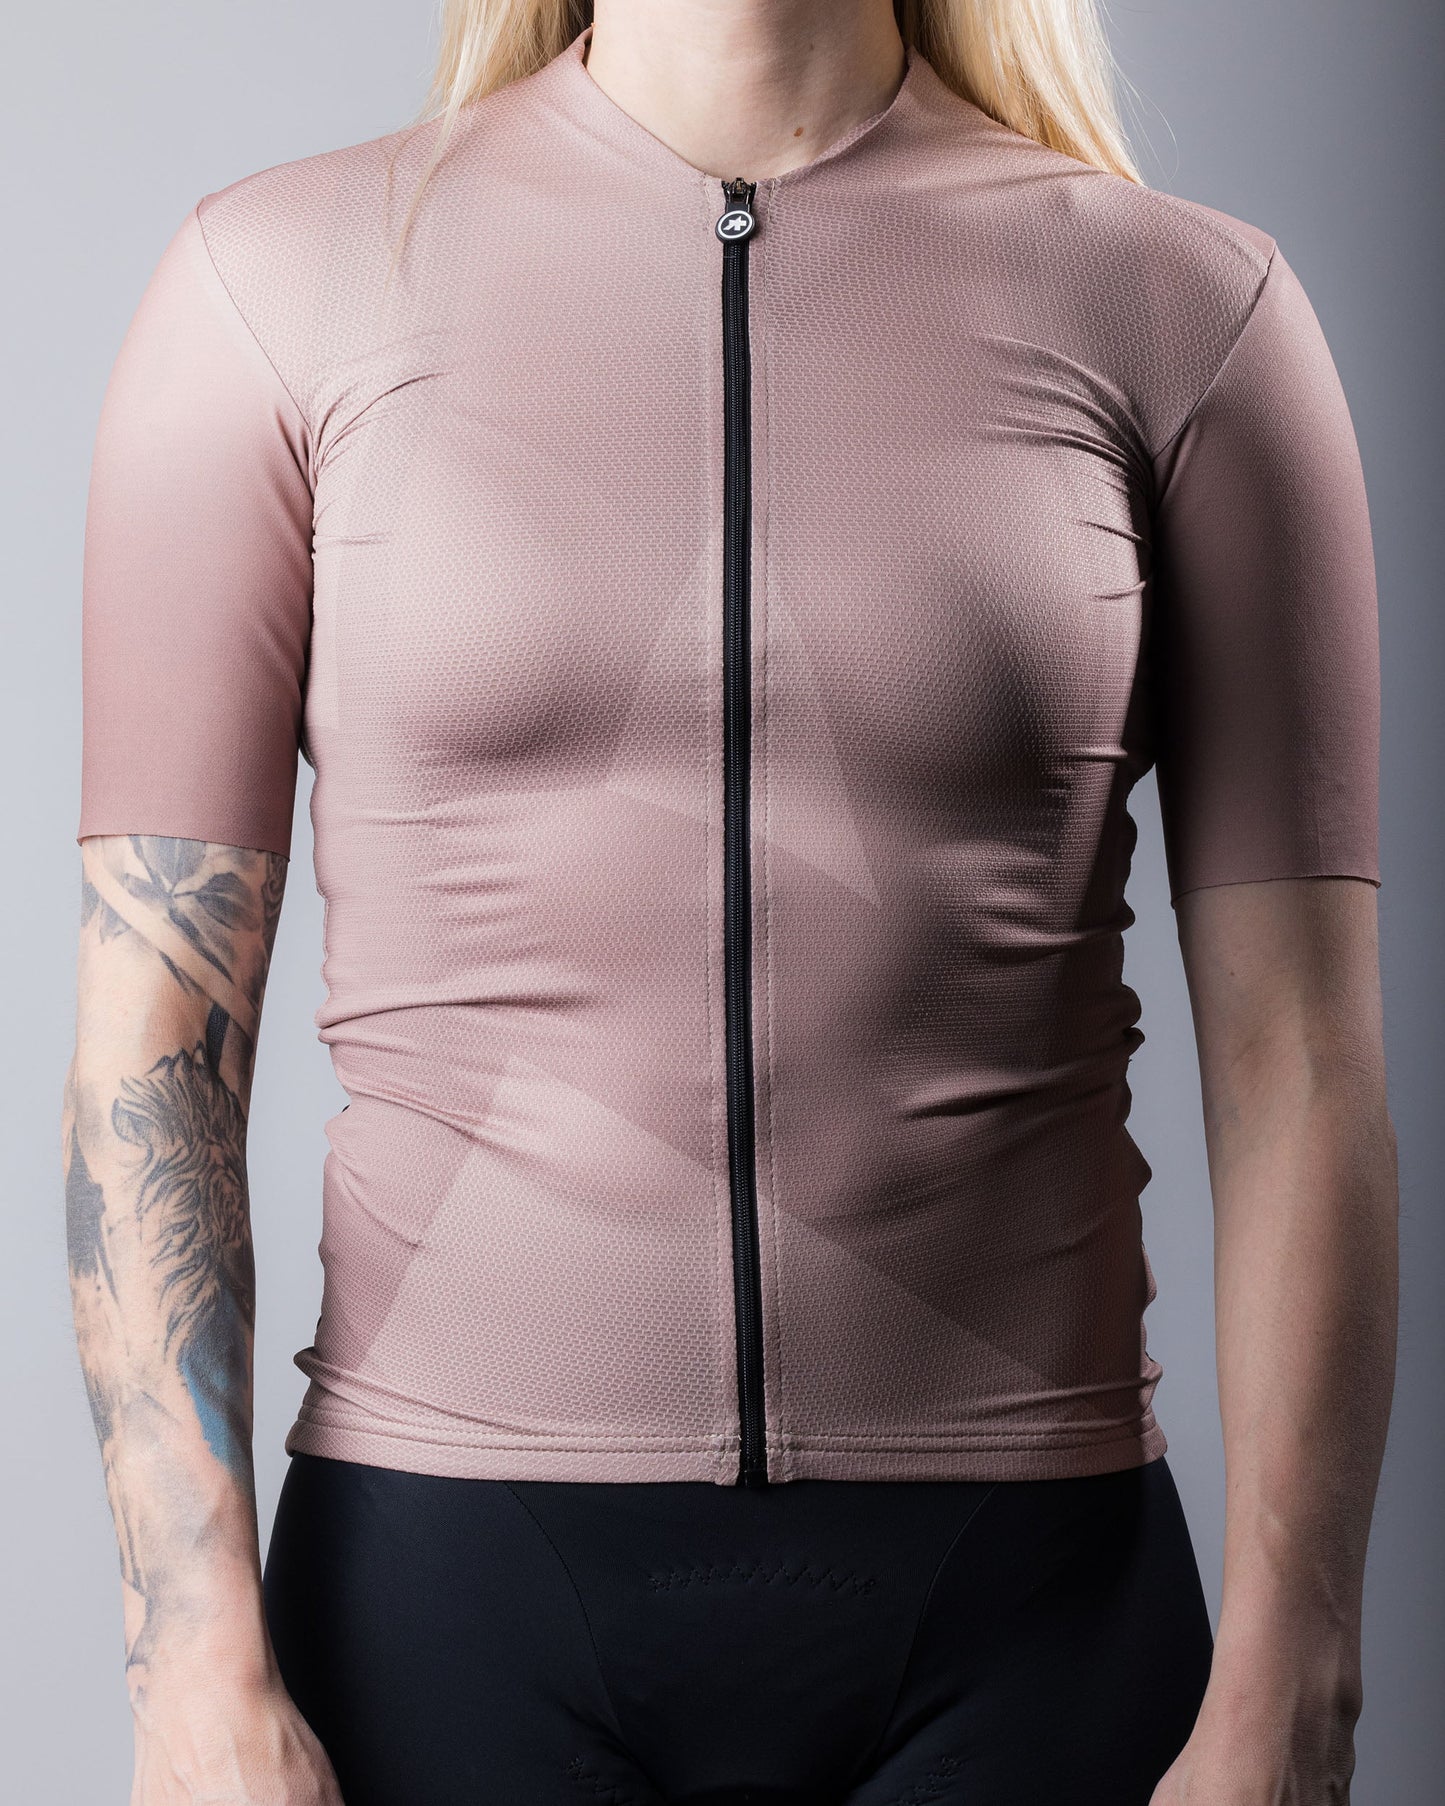 approved fundamental cycling jersey nude women